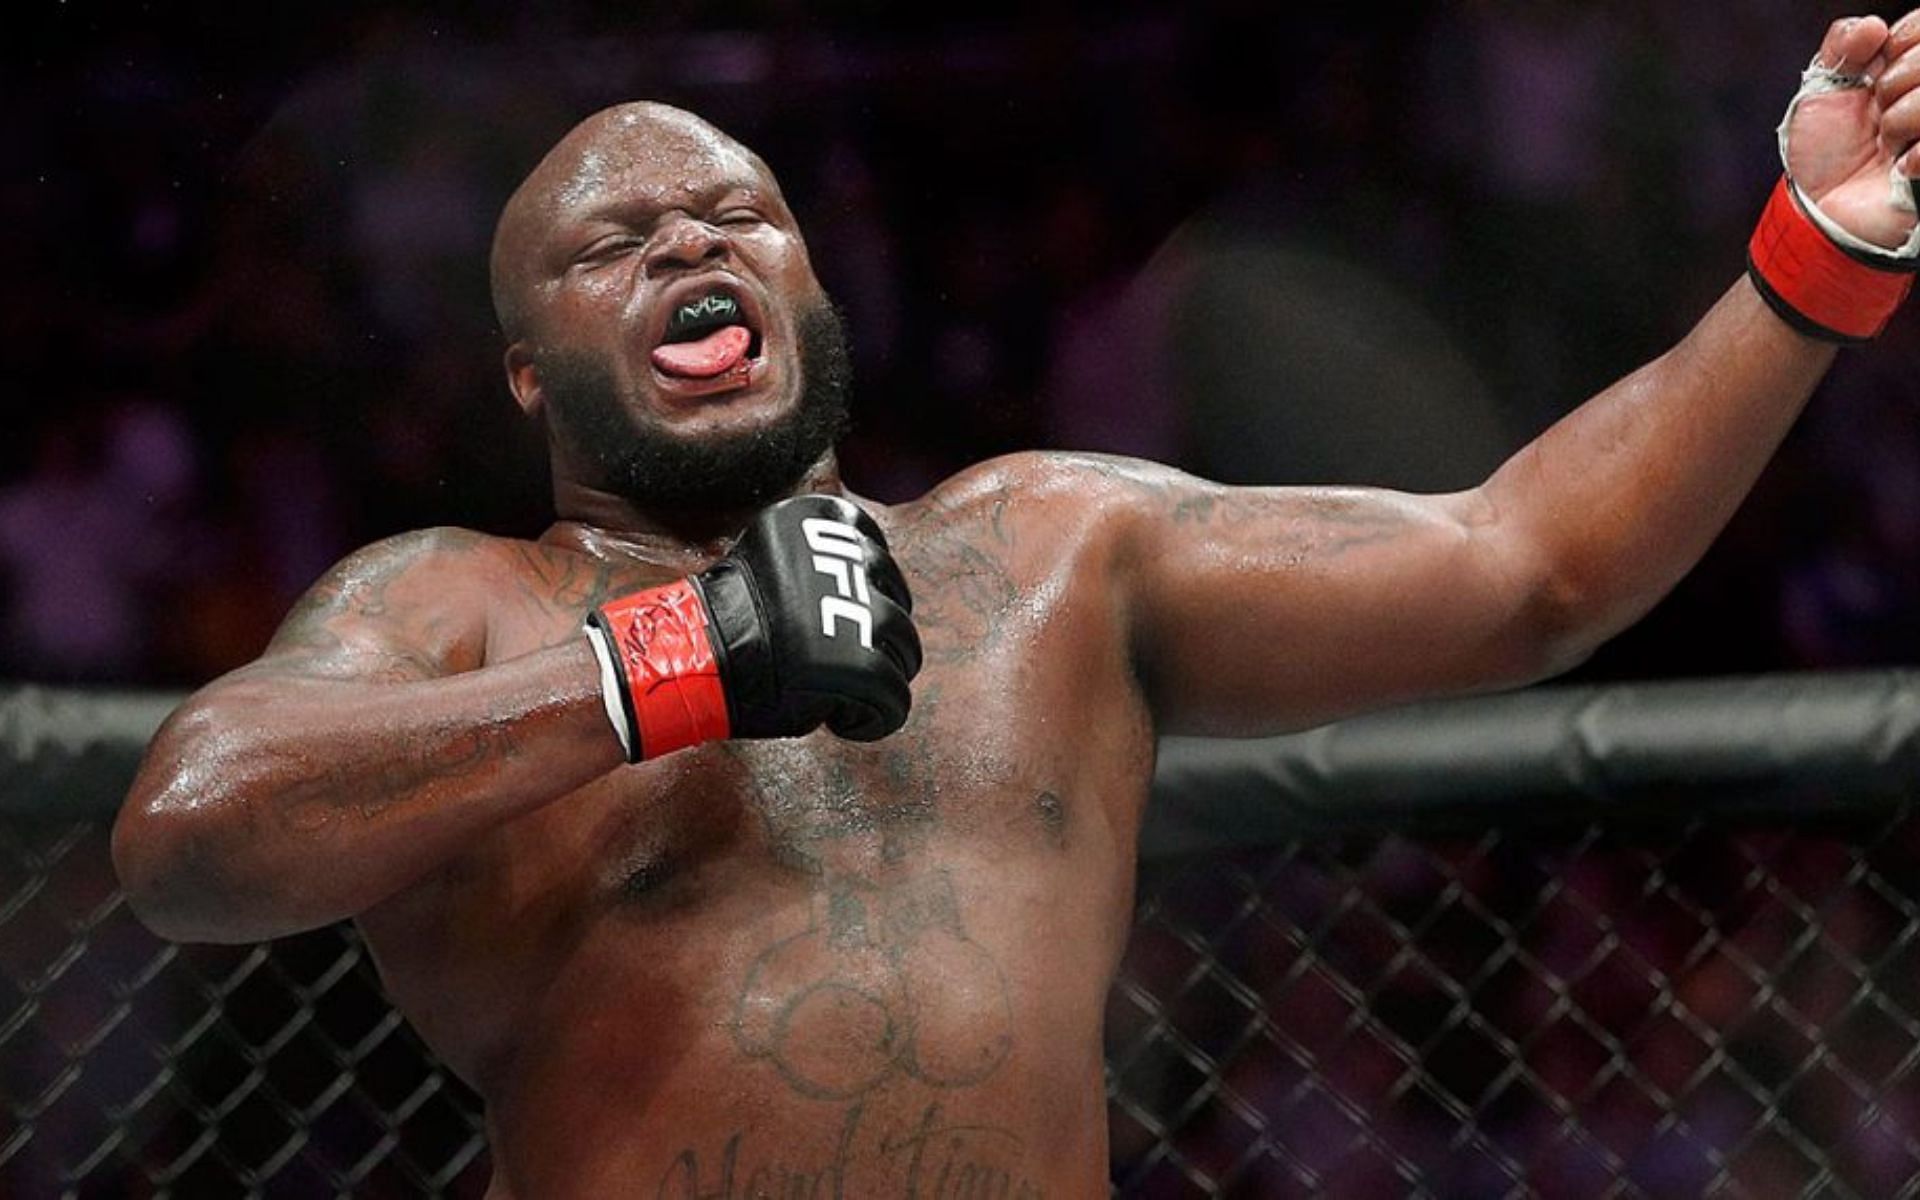 With 13 knockouts to his name, Derrick Lewis is the UFC